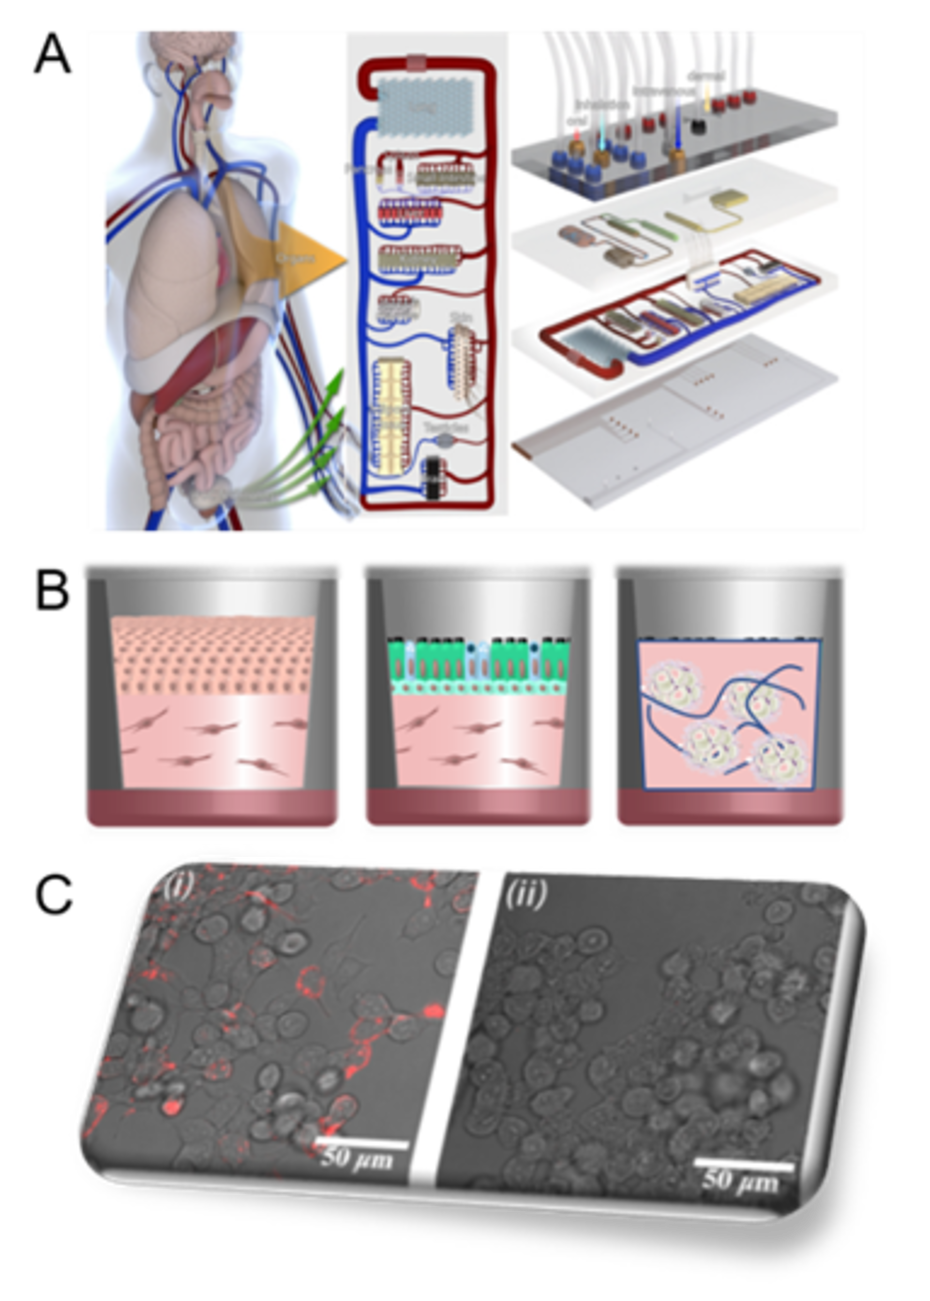 A, Organ-on-a-chip platform. B, skin, broncho-epithelial, and adipose tissue (from left to right) used as model systems. C, high end microscopy to support the analyses.